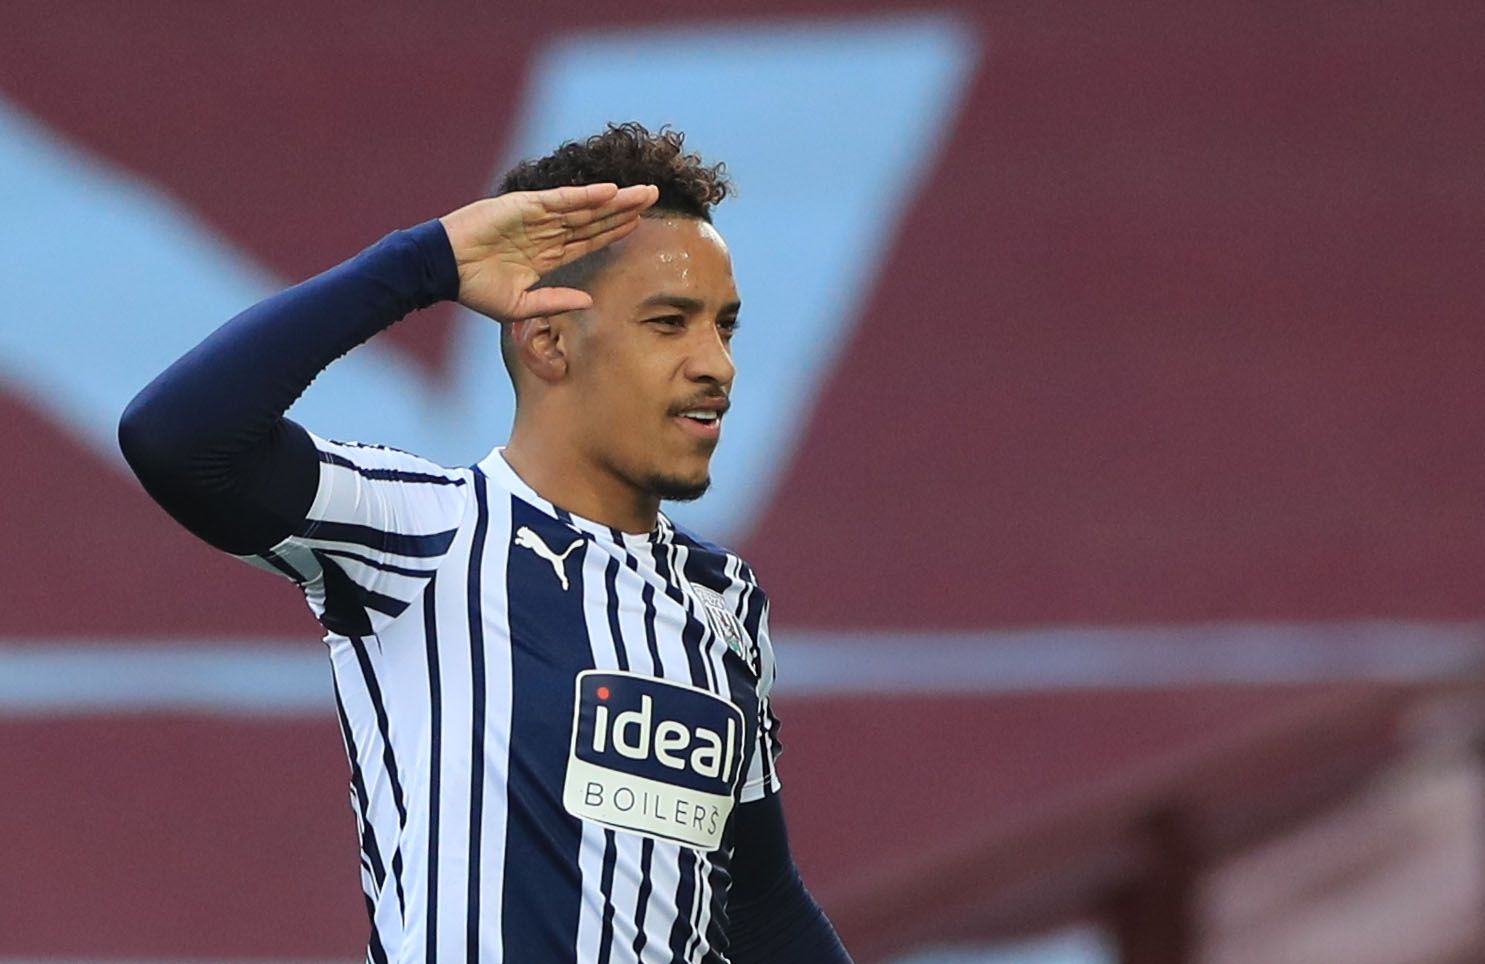 Soccer Football - Premier League - Aston Villa v West Bromwich Albion  - Villa Park, Birmingham, Britain - April 25, 2021 West Bromwich Albion's Matheus Pereira celebrates scoring their first goal from the penalty spot Pool via REUTERS/Mike Egerton EDITORIAL USE ONLY. No use with unauthorized audio, video, data, fixture lists, club/league logos or 'live' services. Online in-match use limited to 75 images, no video emulation. No use in betting, games or single club /league/player publications.  P